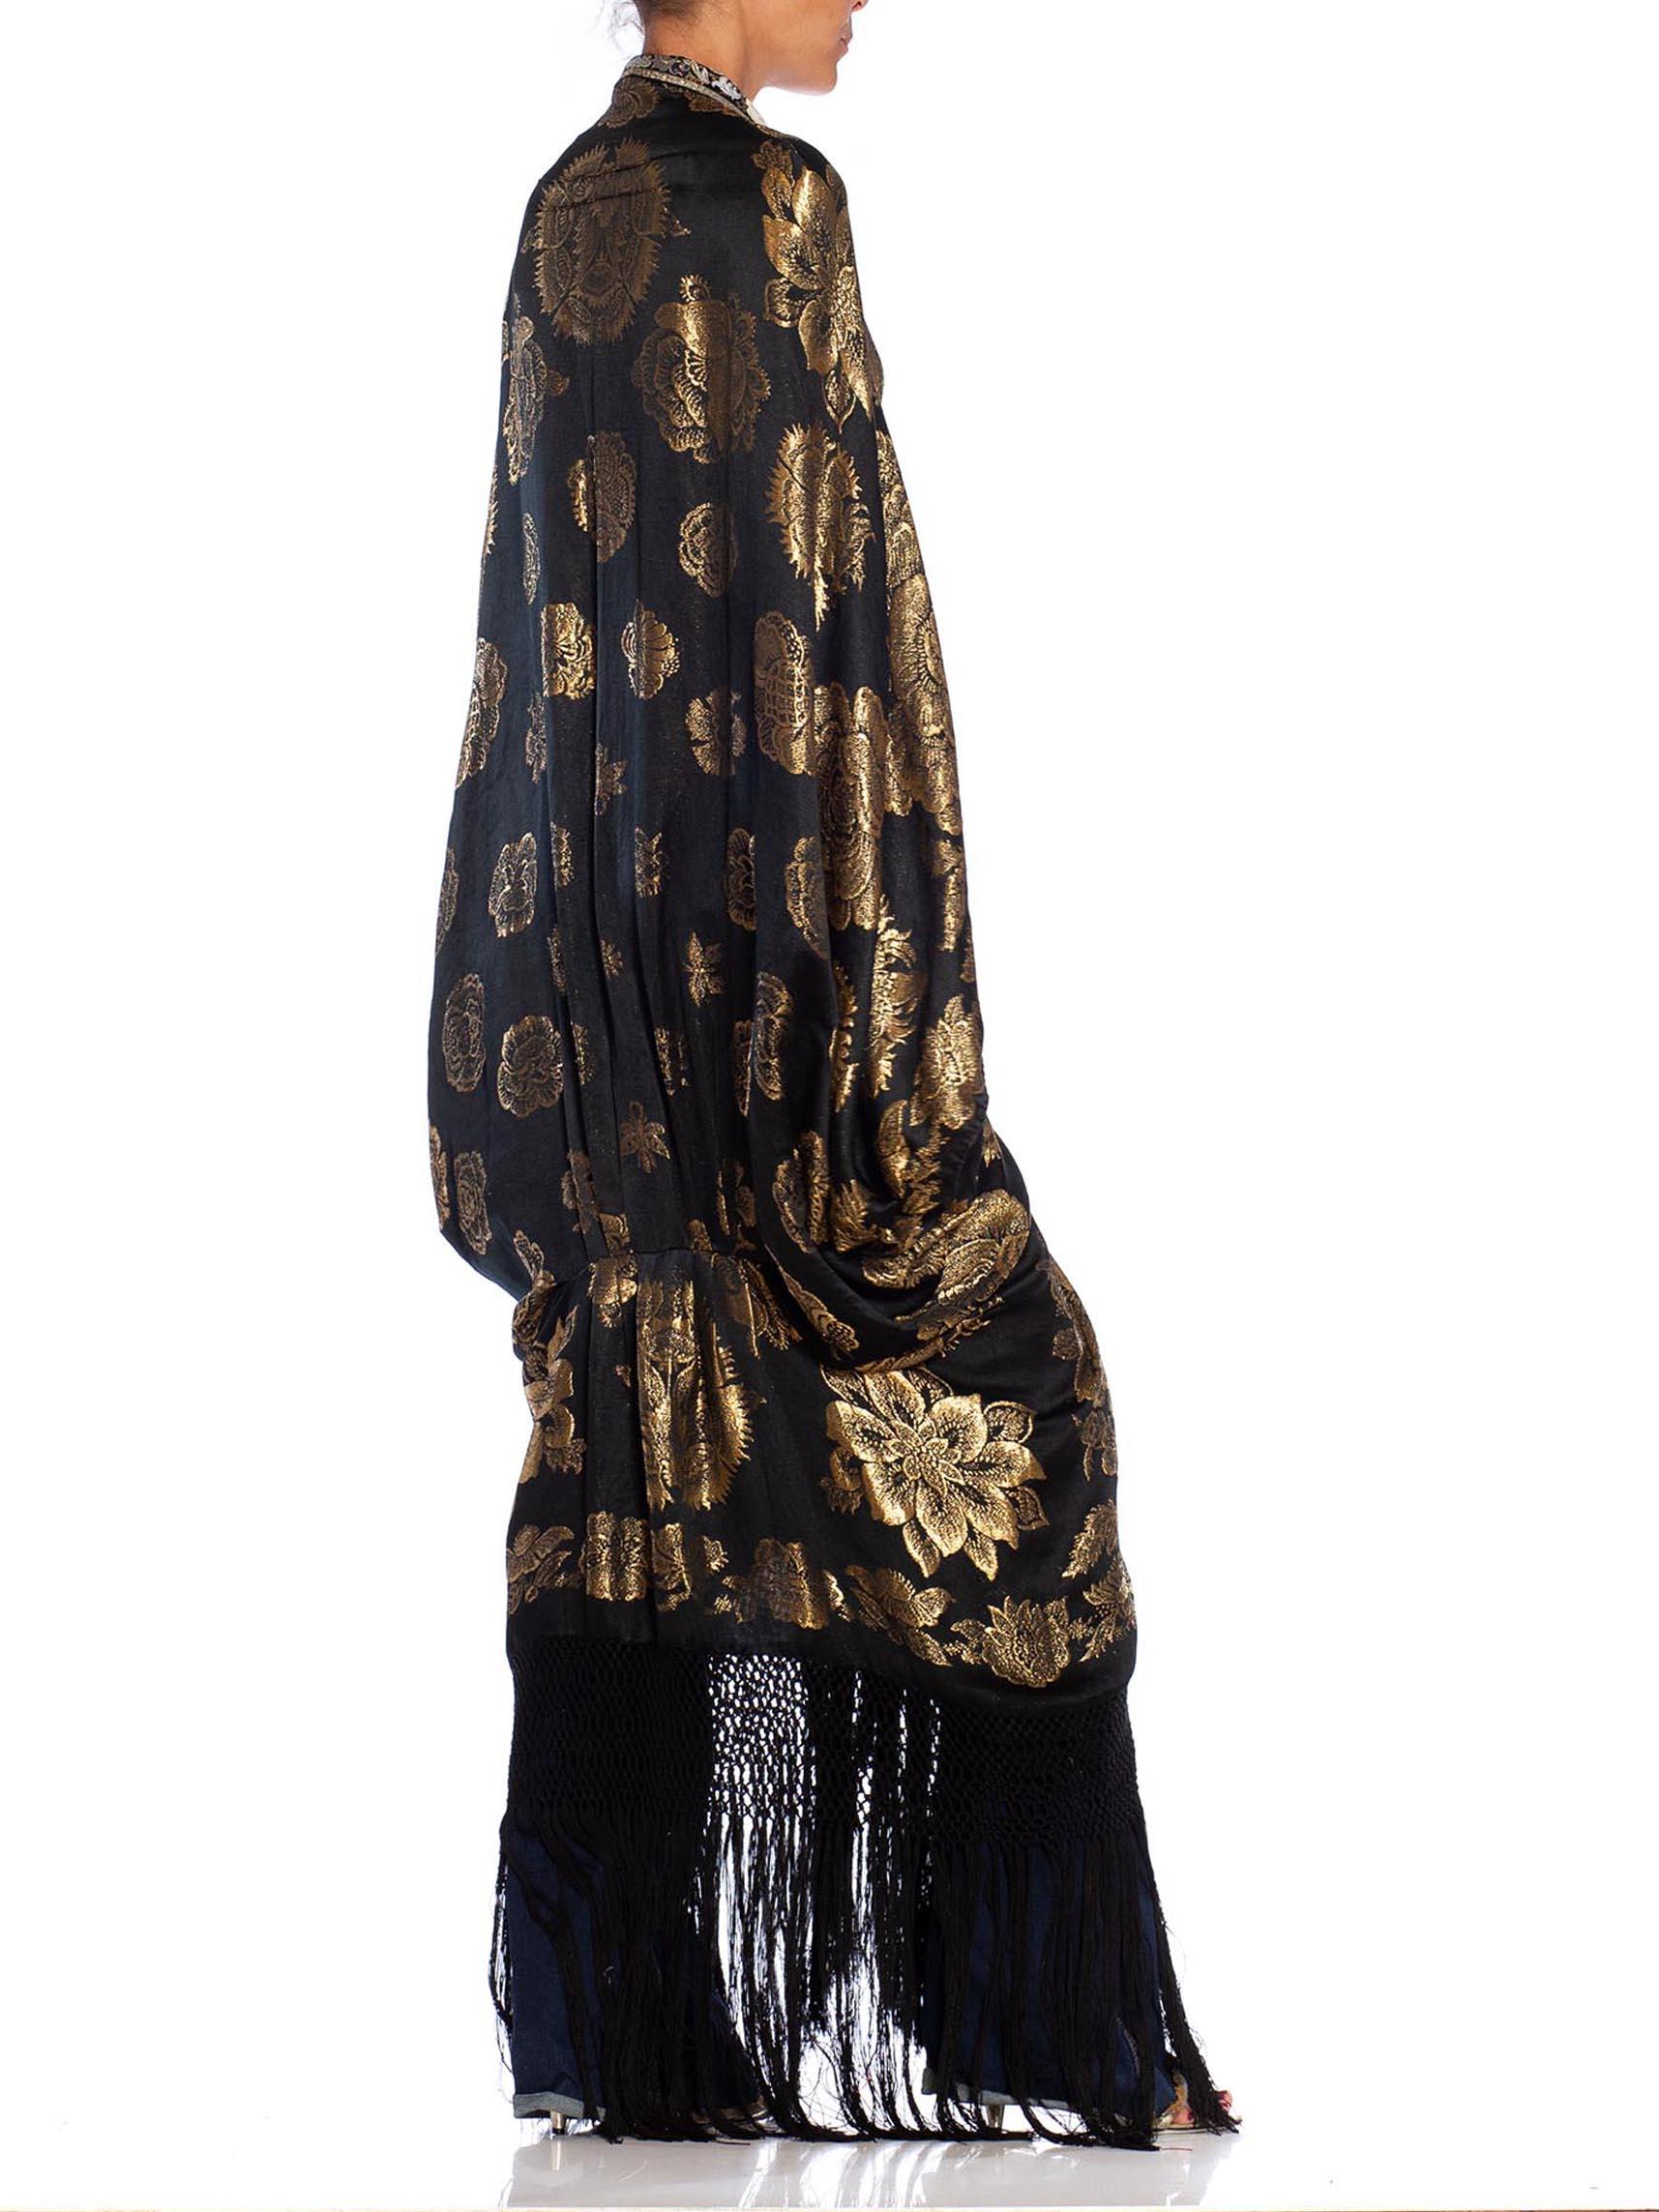 MORPHEW COLLECTION Black, Gold & Cream Metallic Silk Lamé Cocoon With Fringe An For Sale 3